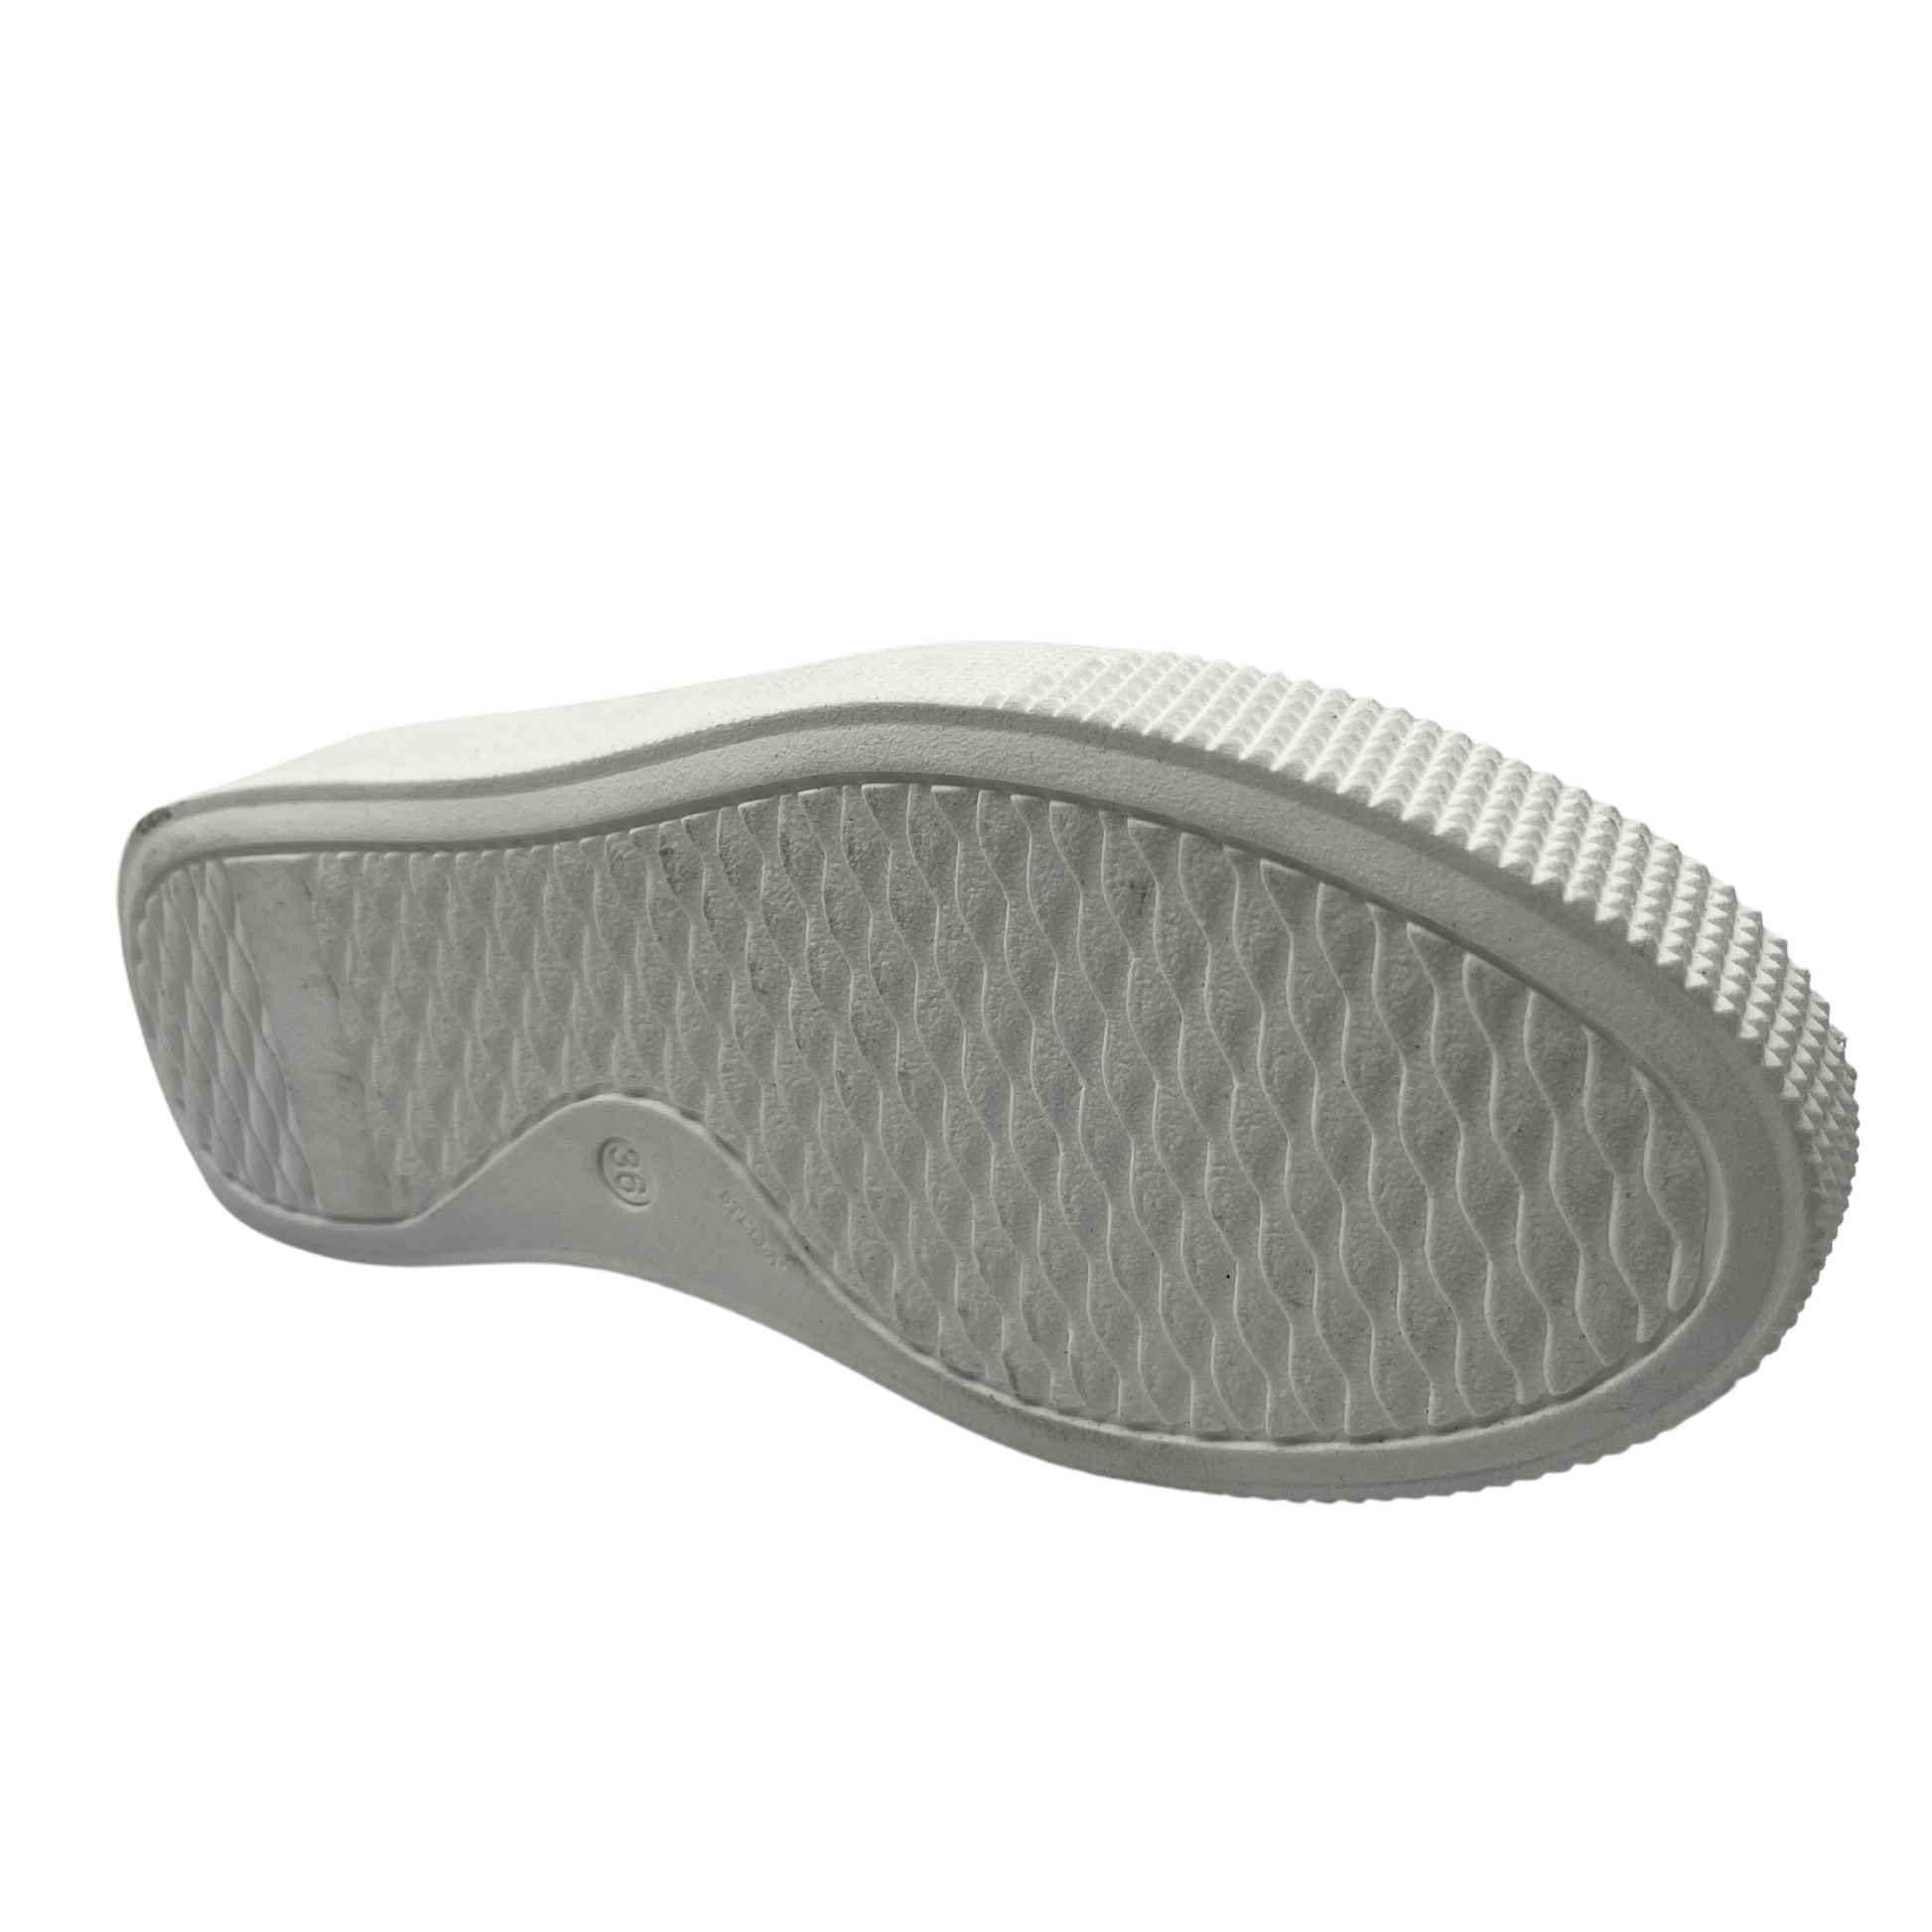 Bottom view of leather sneaker with white rubber outsole